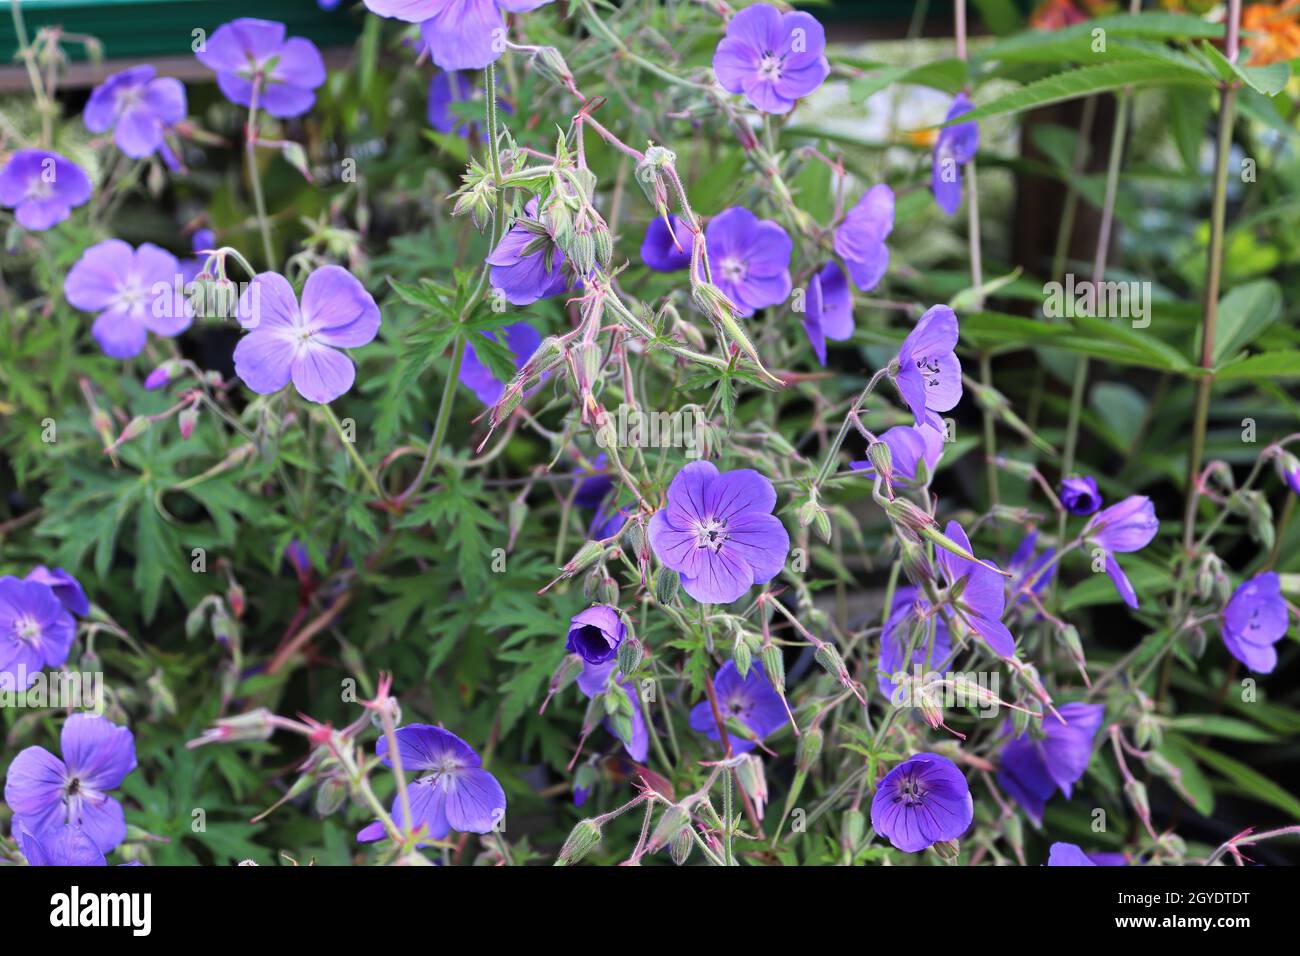 A cranesbill plant with viney purple flowers. Stock Photo